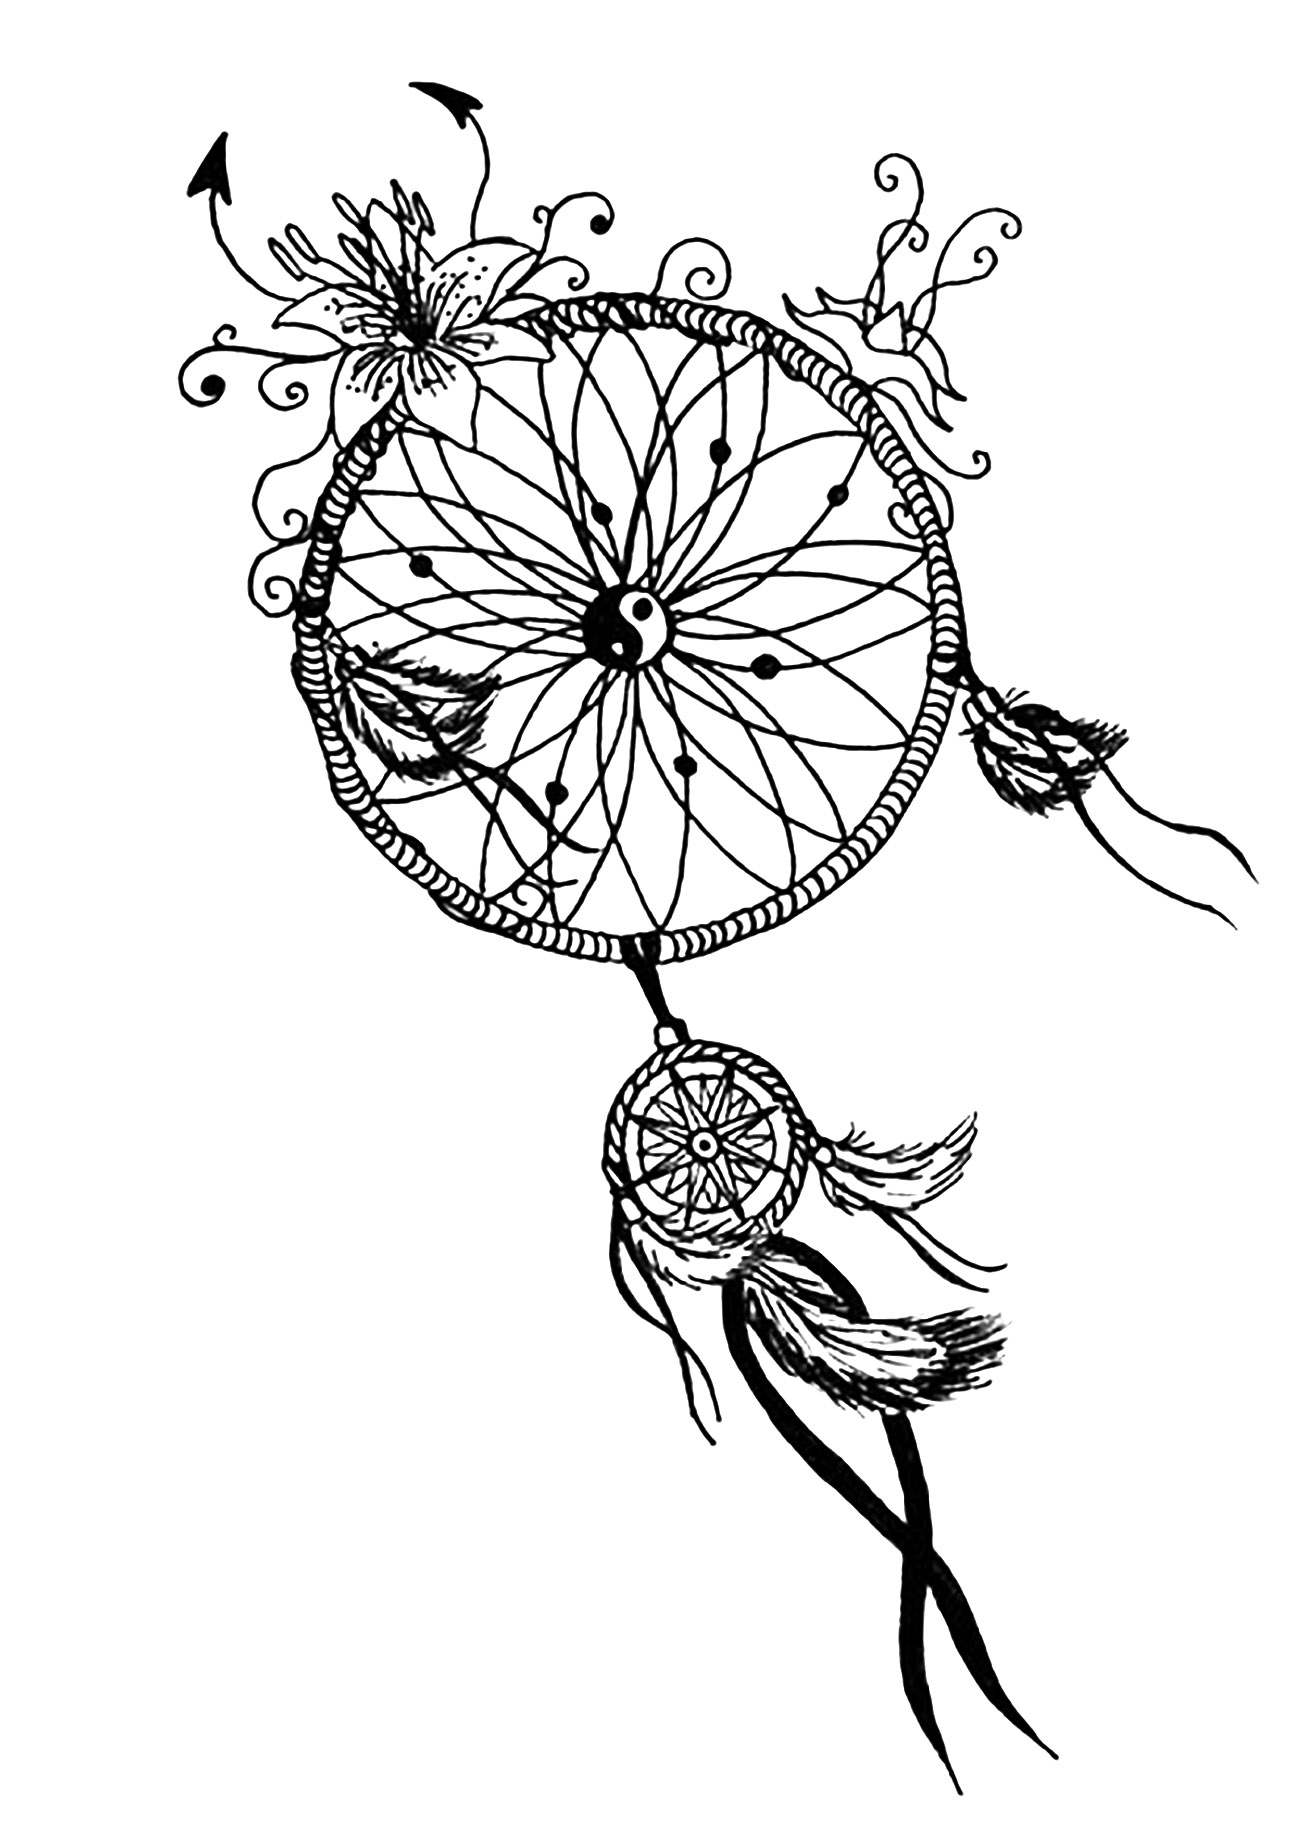 Feather - Coloring Pages for Adults - Page 2